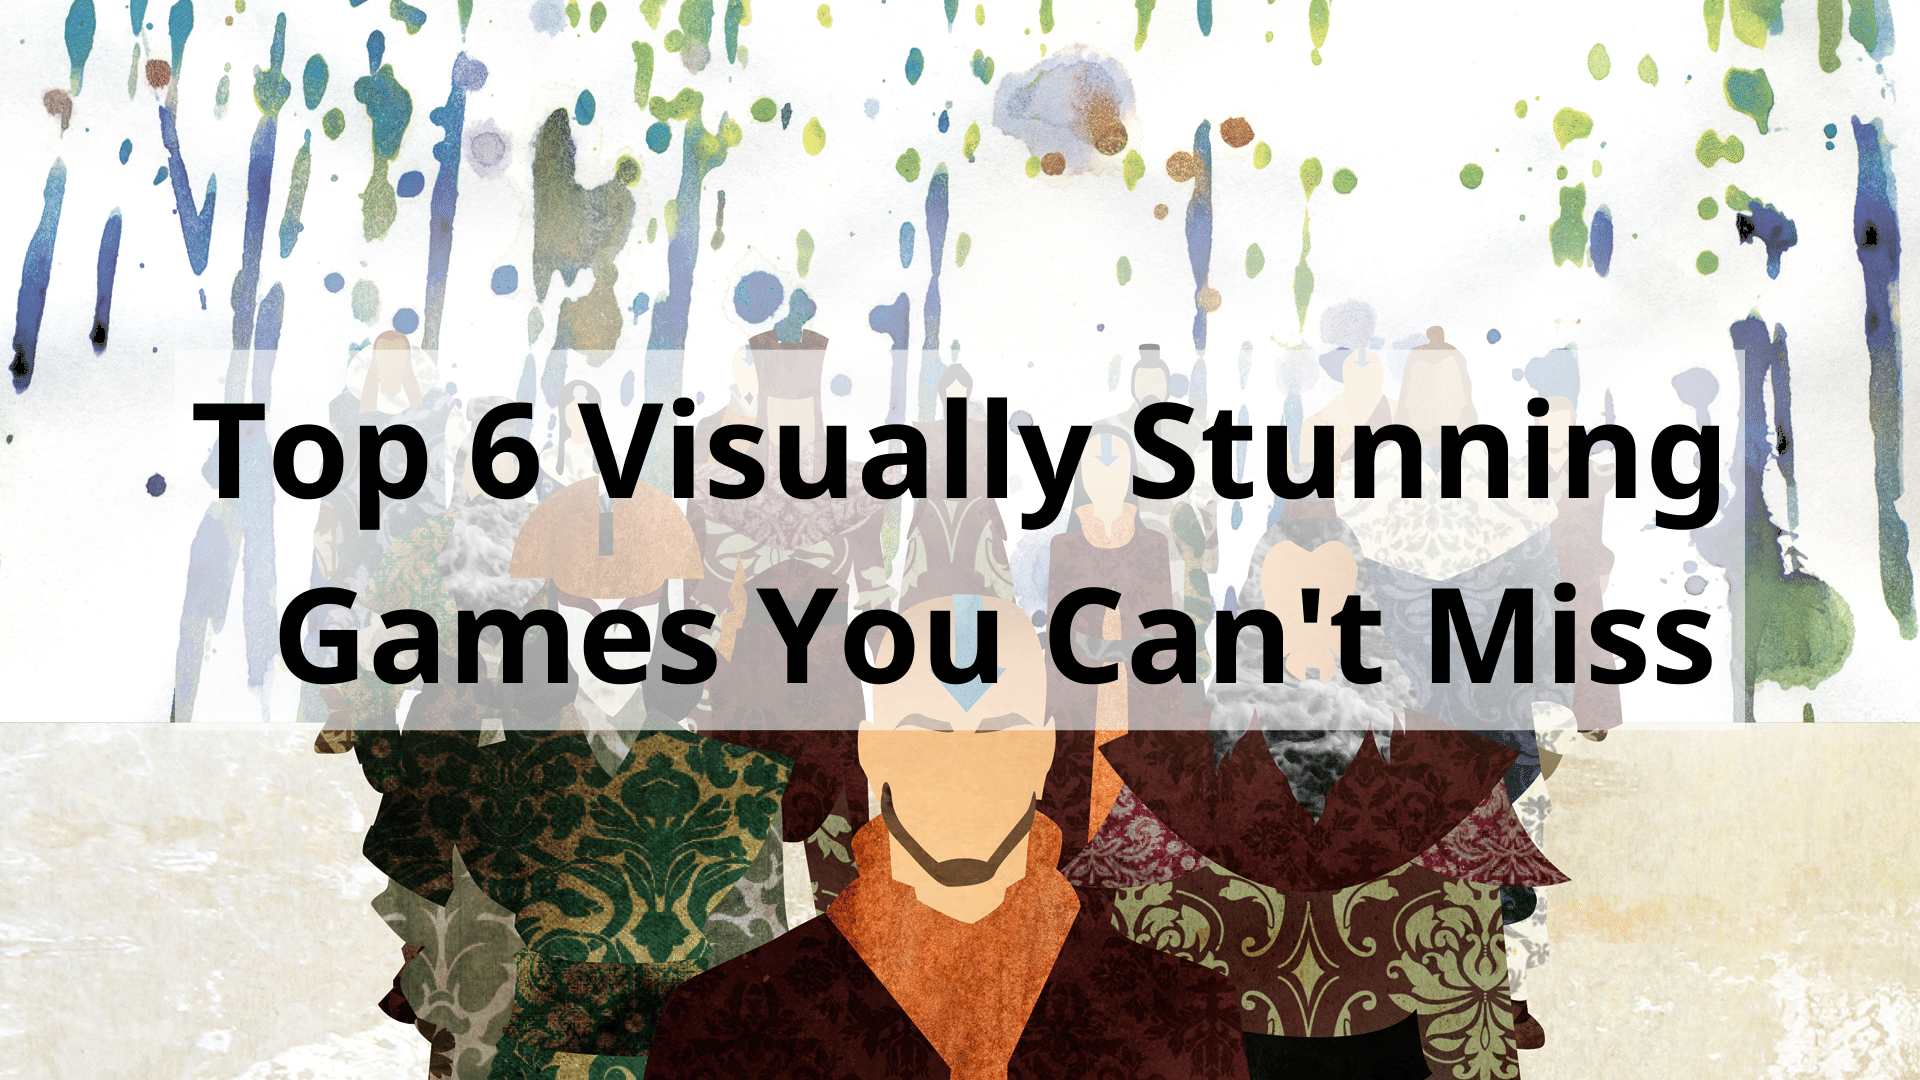 Top 6 Visually Stunning Games You Can't Miss